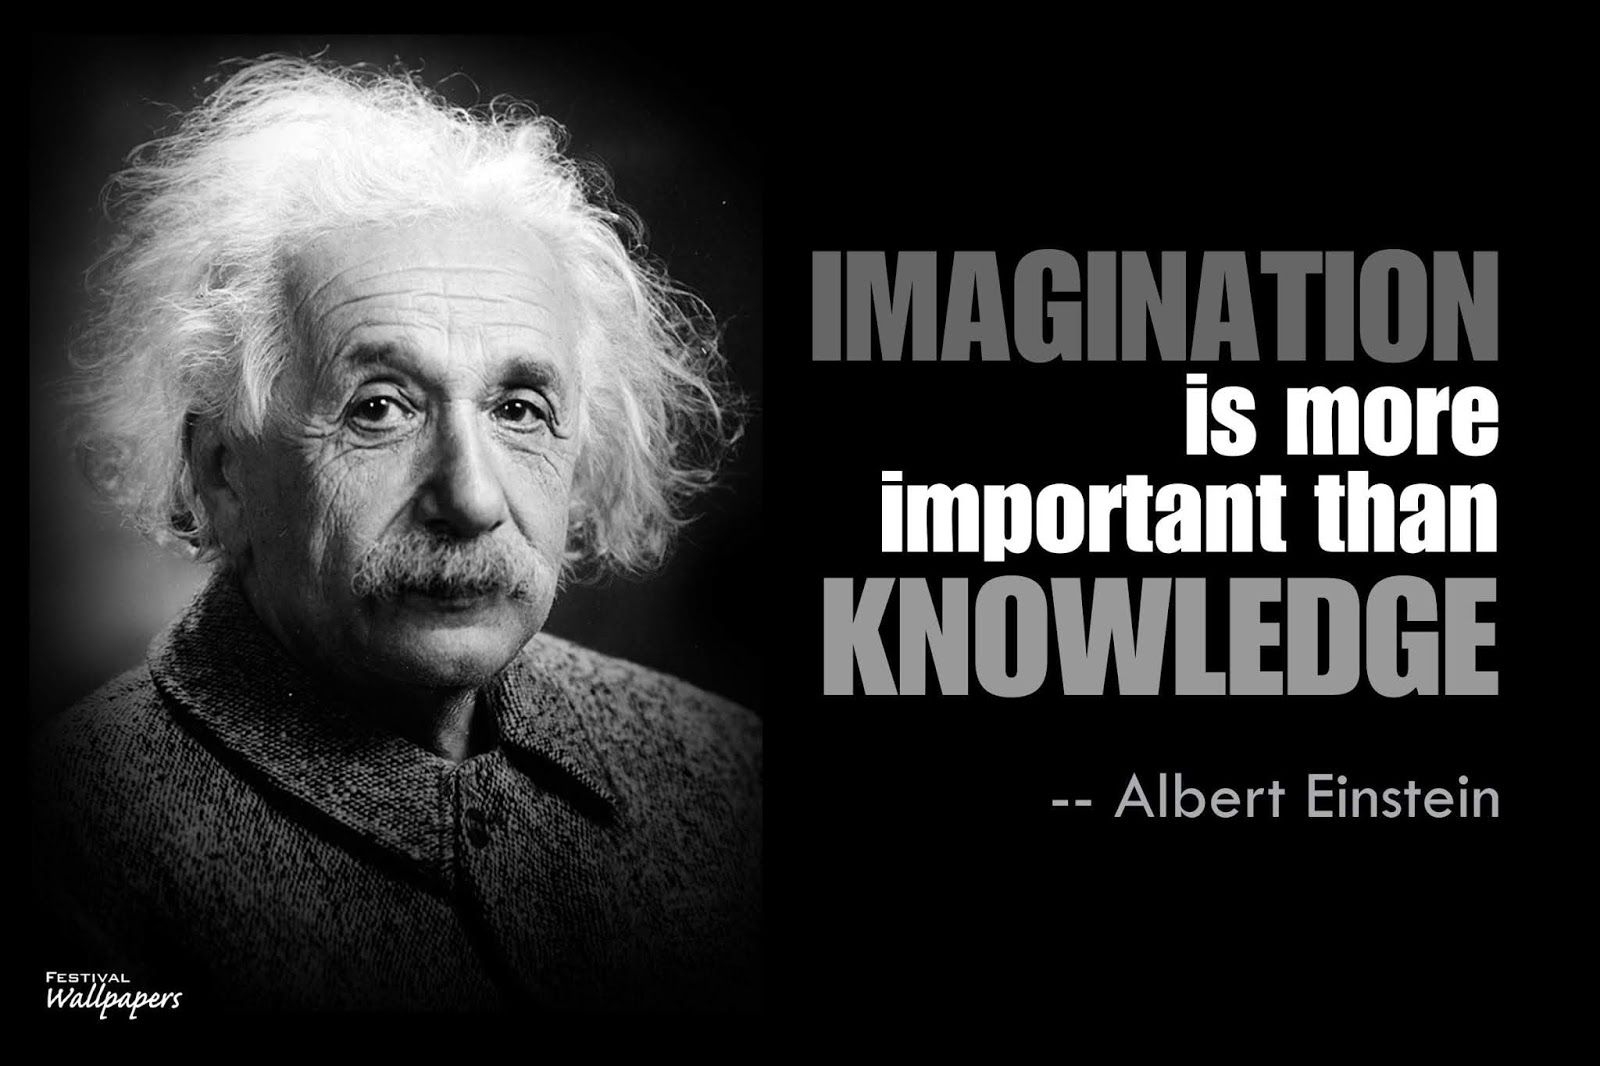 Famous Quotes By Albert Einstein About Life